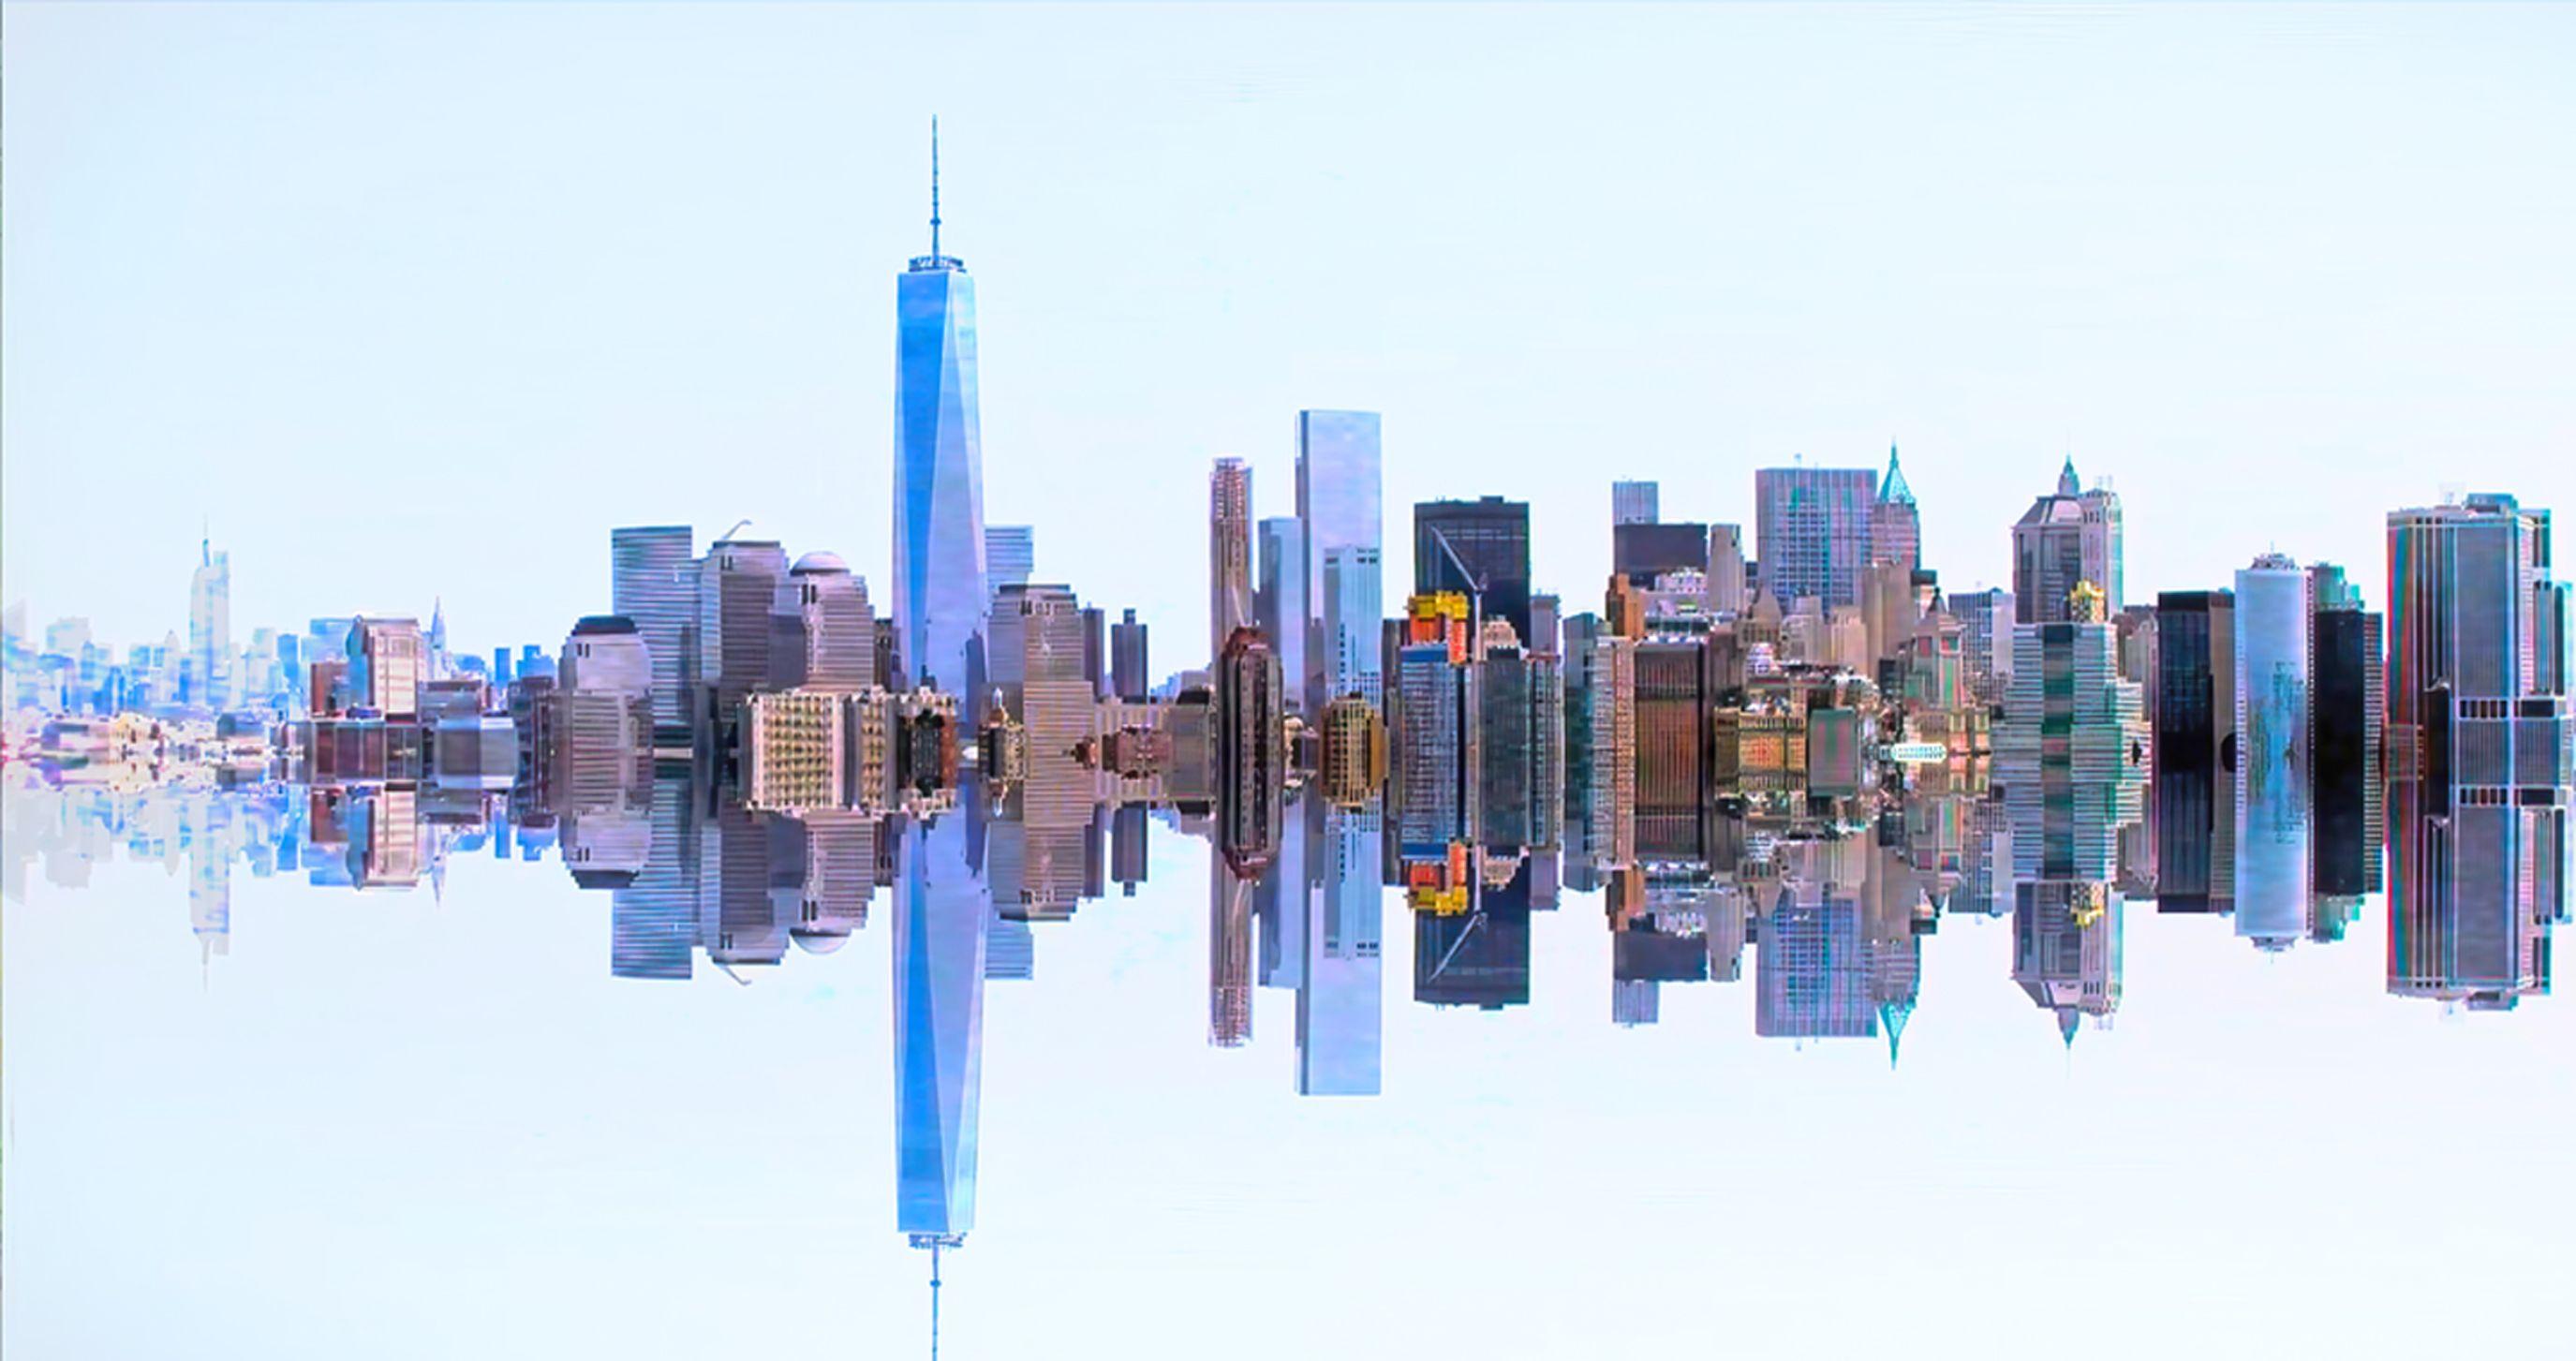 Jochen Cerny Color Photograph - NYC - Downtown Pano II, Photograph, C-Type